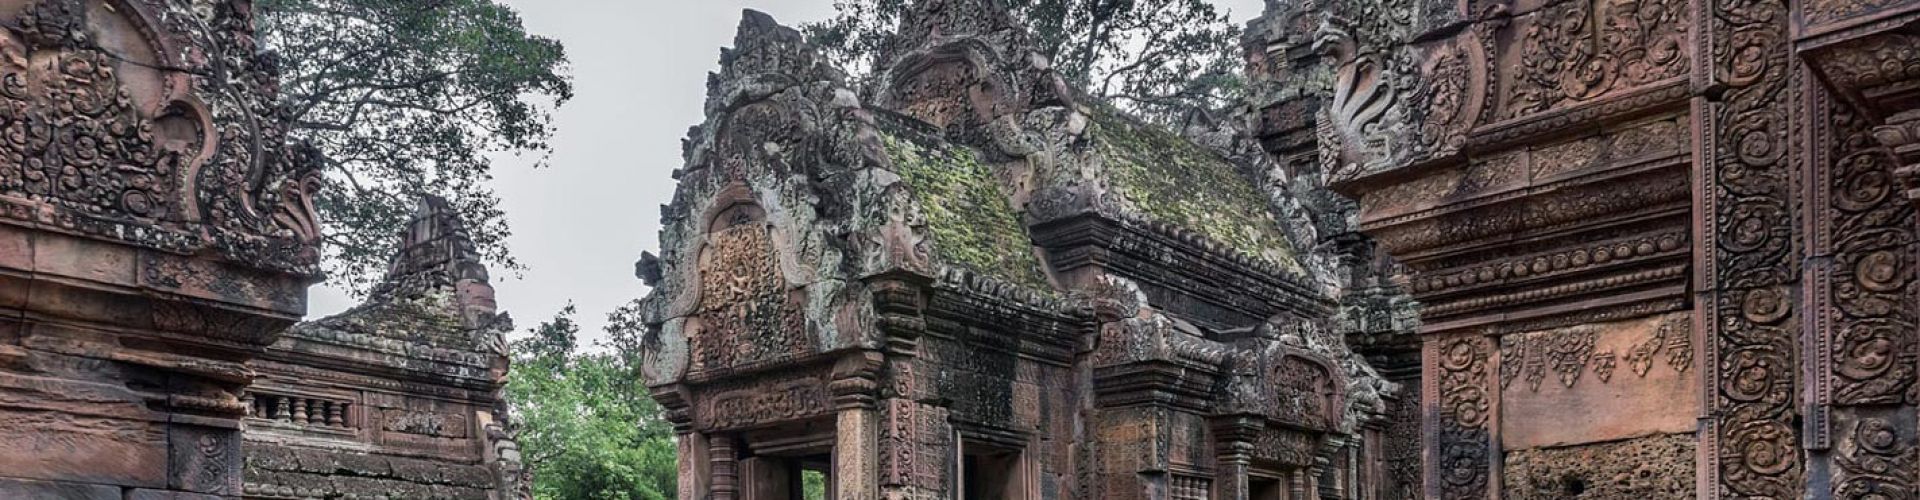 Destinations in Banteay Meanchey